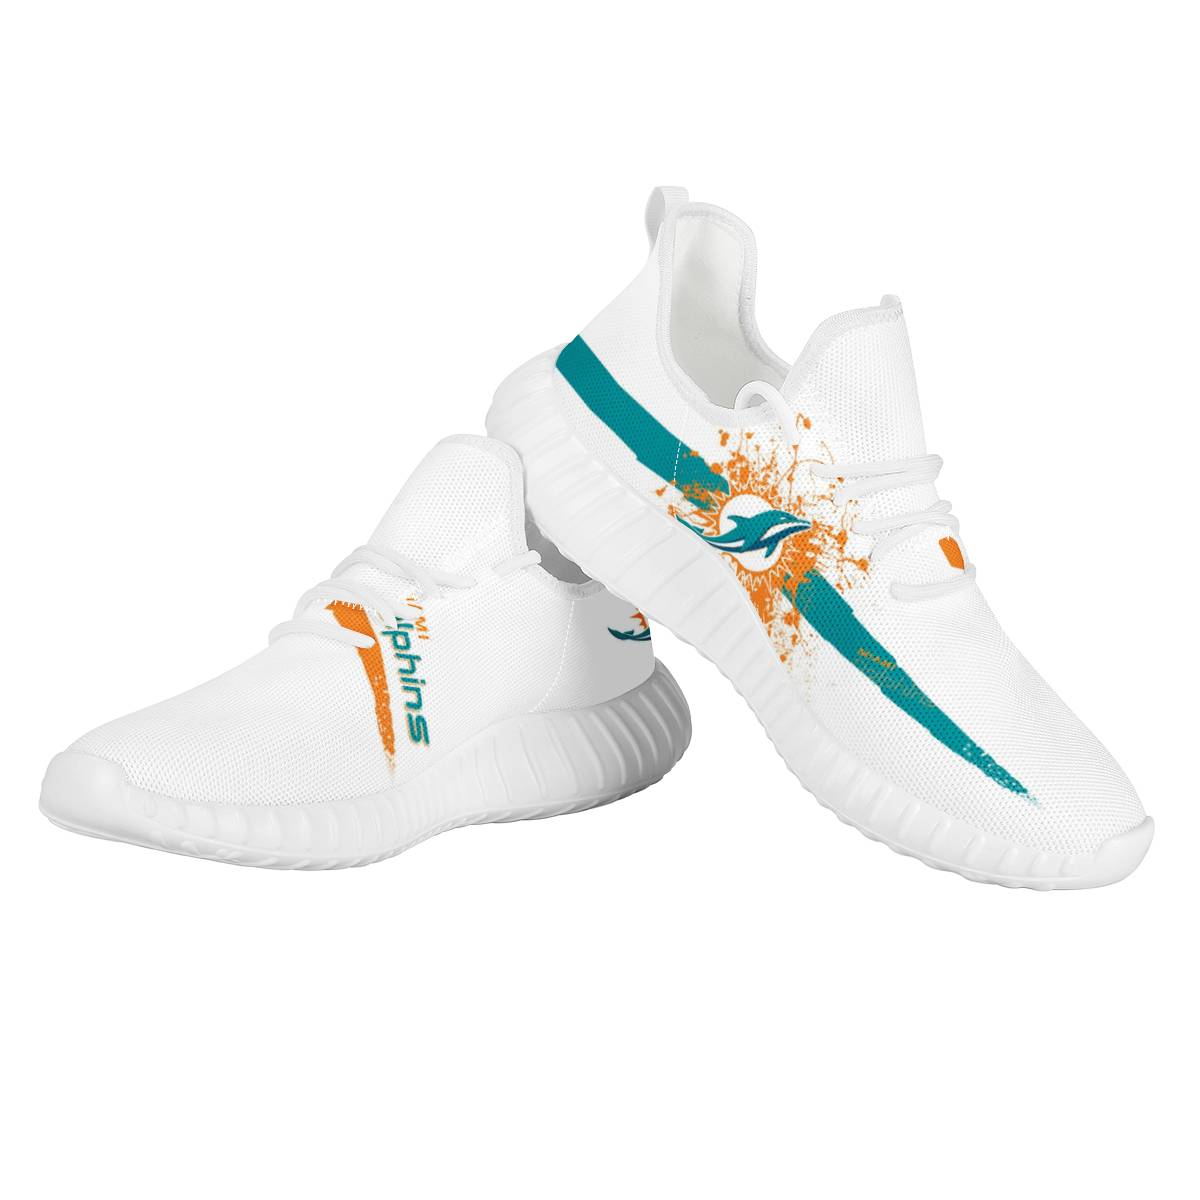 Men's Miami Dolphins Mesh Knit Sneakers/Shoes 013